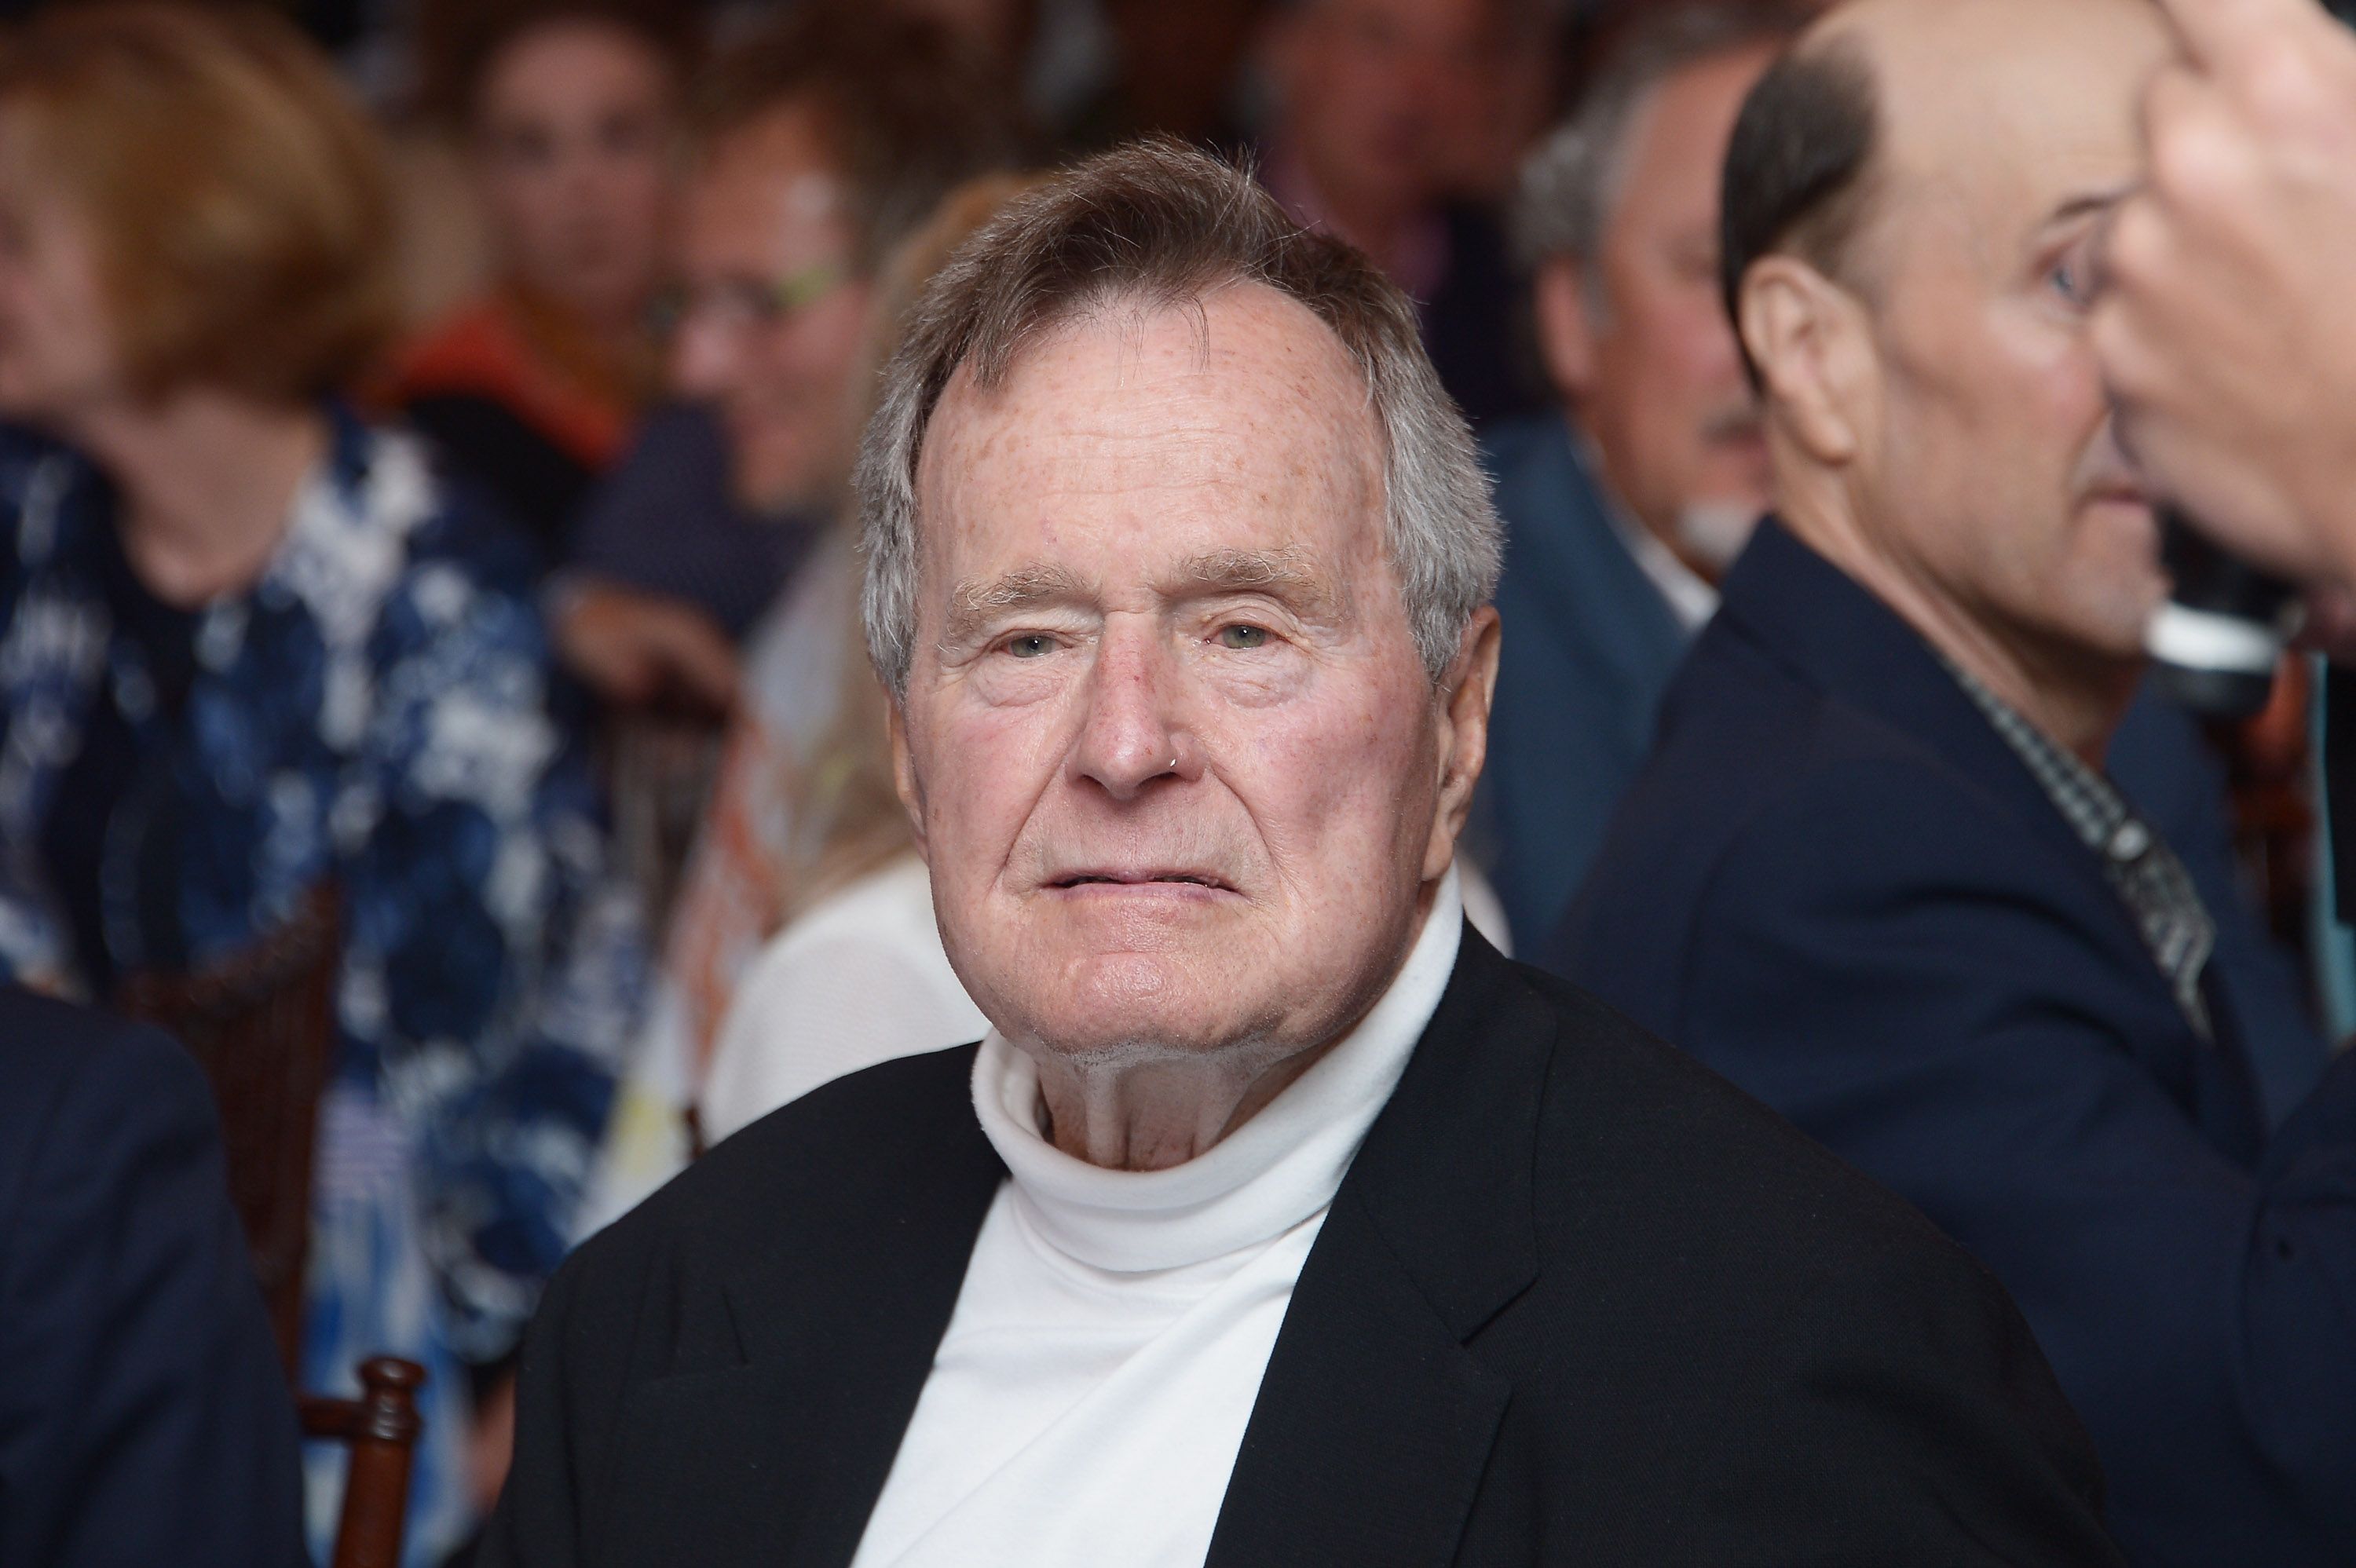 Former President George H.W. Bush celebrates his 88th birthday following the HBO documentary special screening of "41" on June 12, 2012, in Kennebunkport, Maine | Photo: Michael Loccisano/Getty Images 